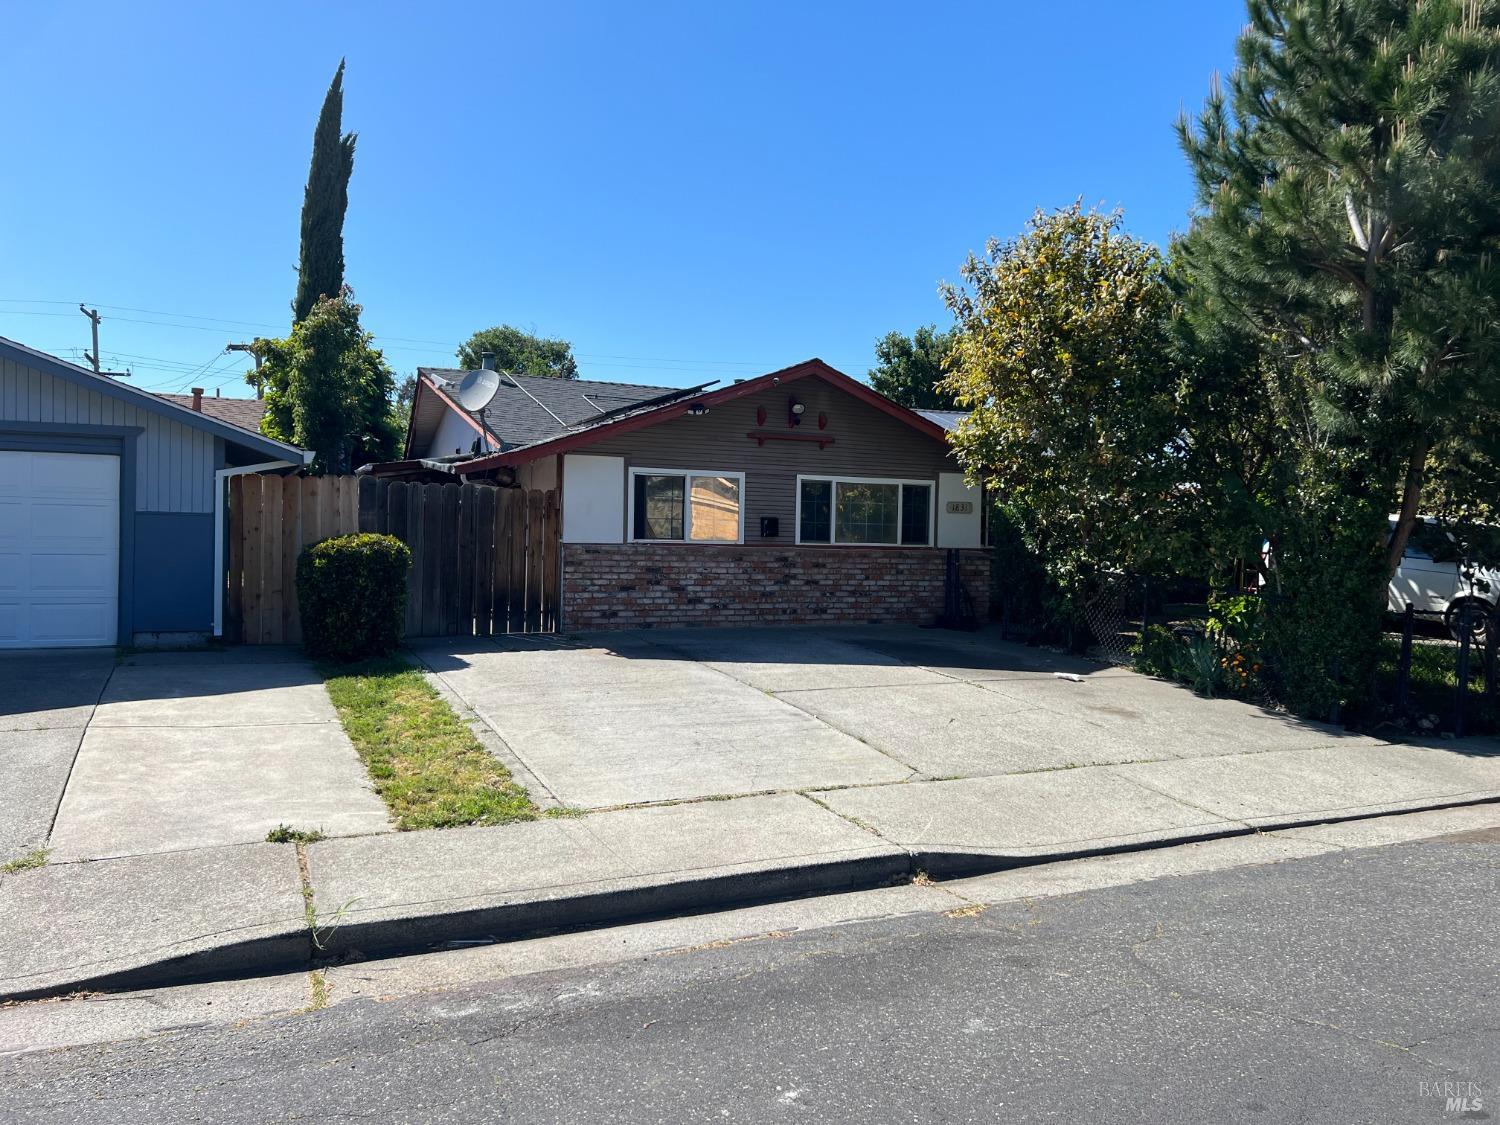 Photo of 1831 Clay St in Fairfield, CA